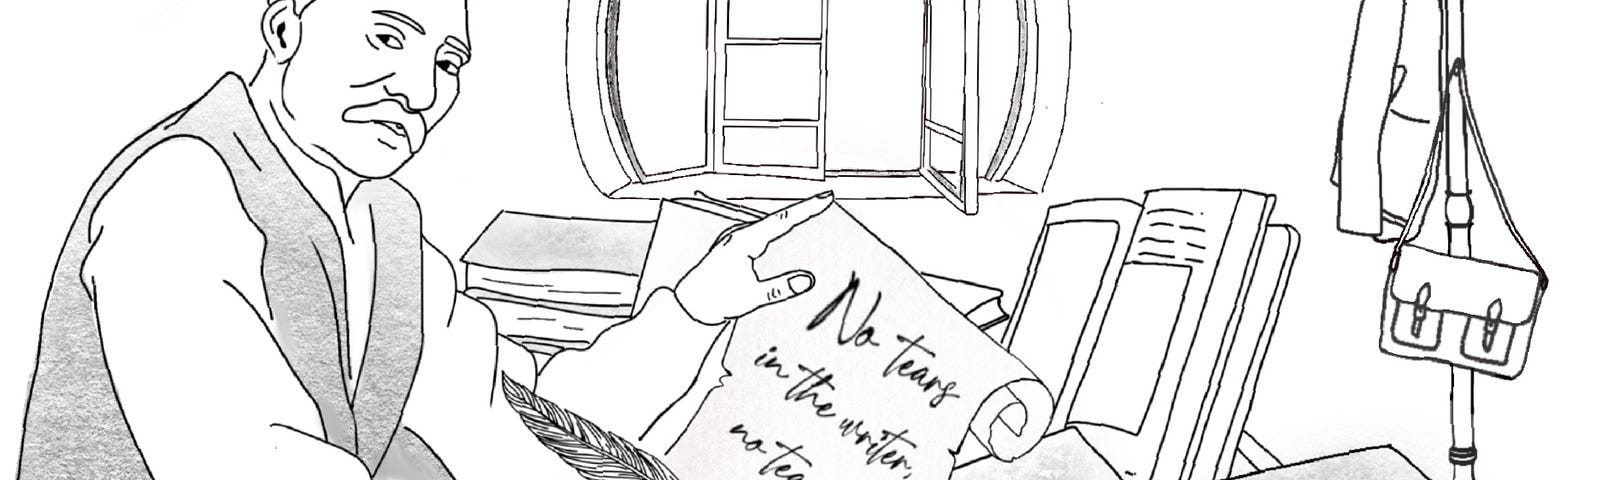 This is a pencil sketch of a writer seated at his cluttered, book-strewn desk holding a scroll in his left hand and a quill pen in his right. On the scroll is the quote “No tears in the writer, no tears in the reader,” from Robert Frost. In the background is a circular window with one pane open. In the right middle ground stands a hat rack with his hat, coat and satchel hanging from it. At the bottom is the quote “One day, I will find the right words, and they will be simple,” from Jack Kerouac.